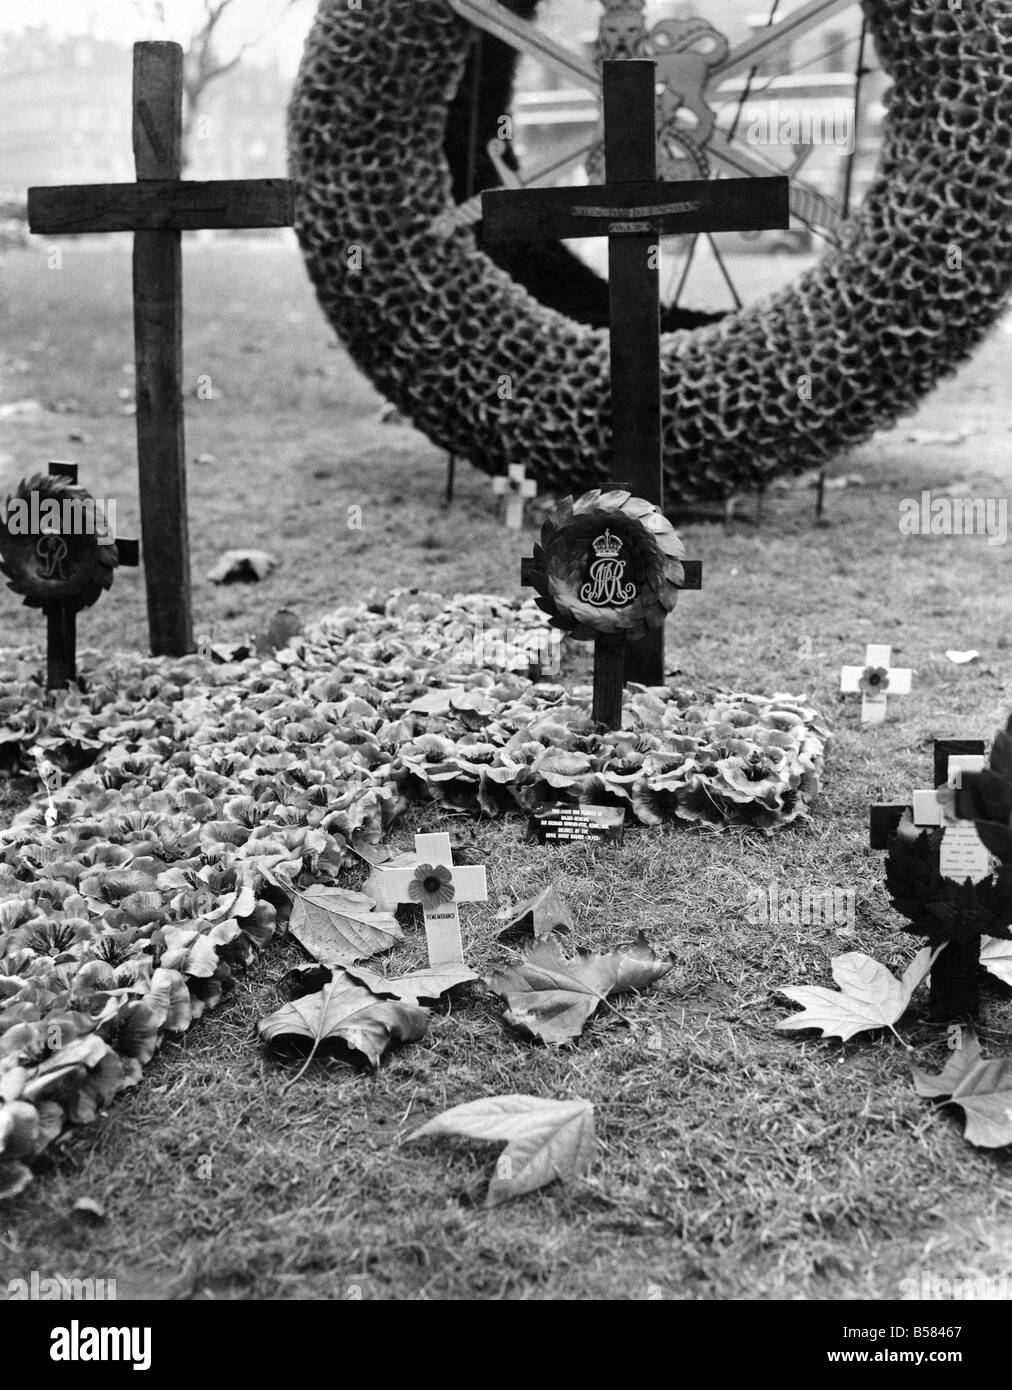 Many People visited the empire field of remembrance in St. Margaret's Churchyard, Westminster, To-day to plant a poppy in memory of someone dear to them. Pic 7-11-53. The cross planted in memory of the Late Queen Mary, By Major General Sir Richard Howard-Vyse, K.C.N.G., D.S.O. colonel of the Royal Horse guards. November 1953 P005404 Stock Photo